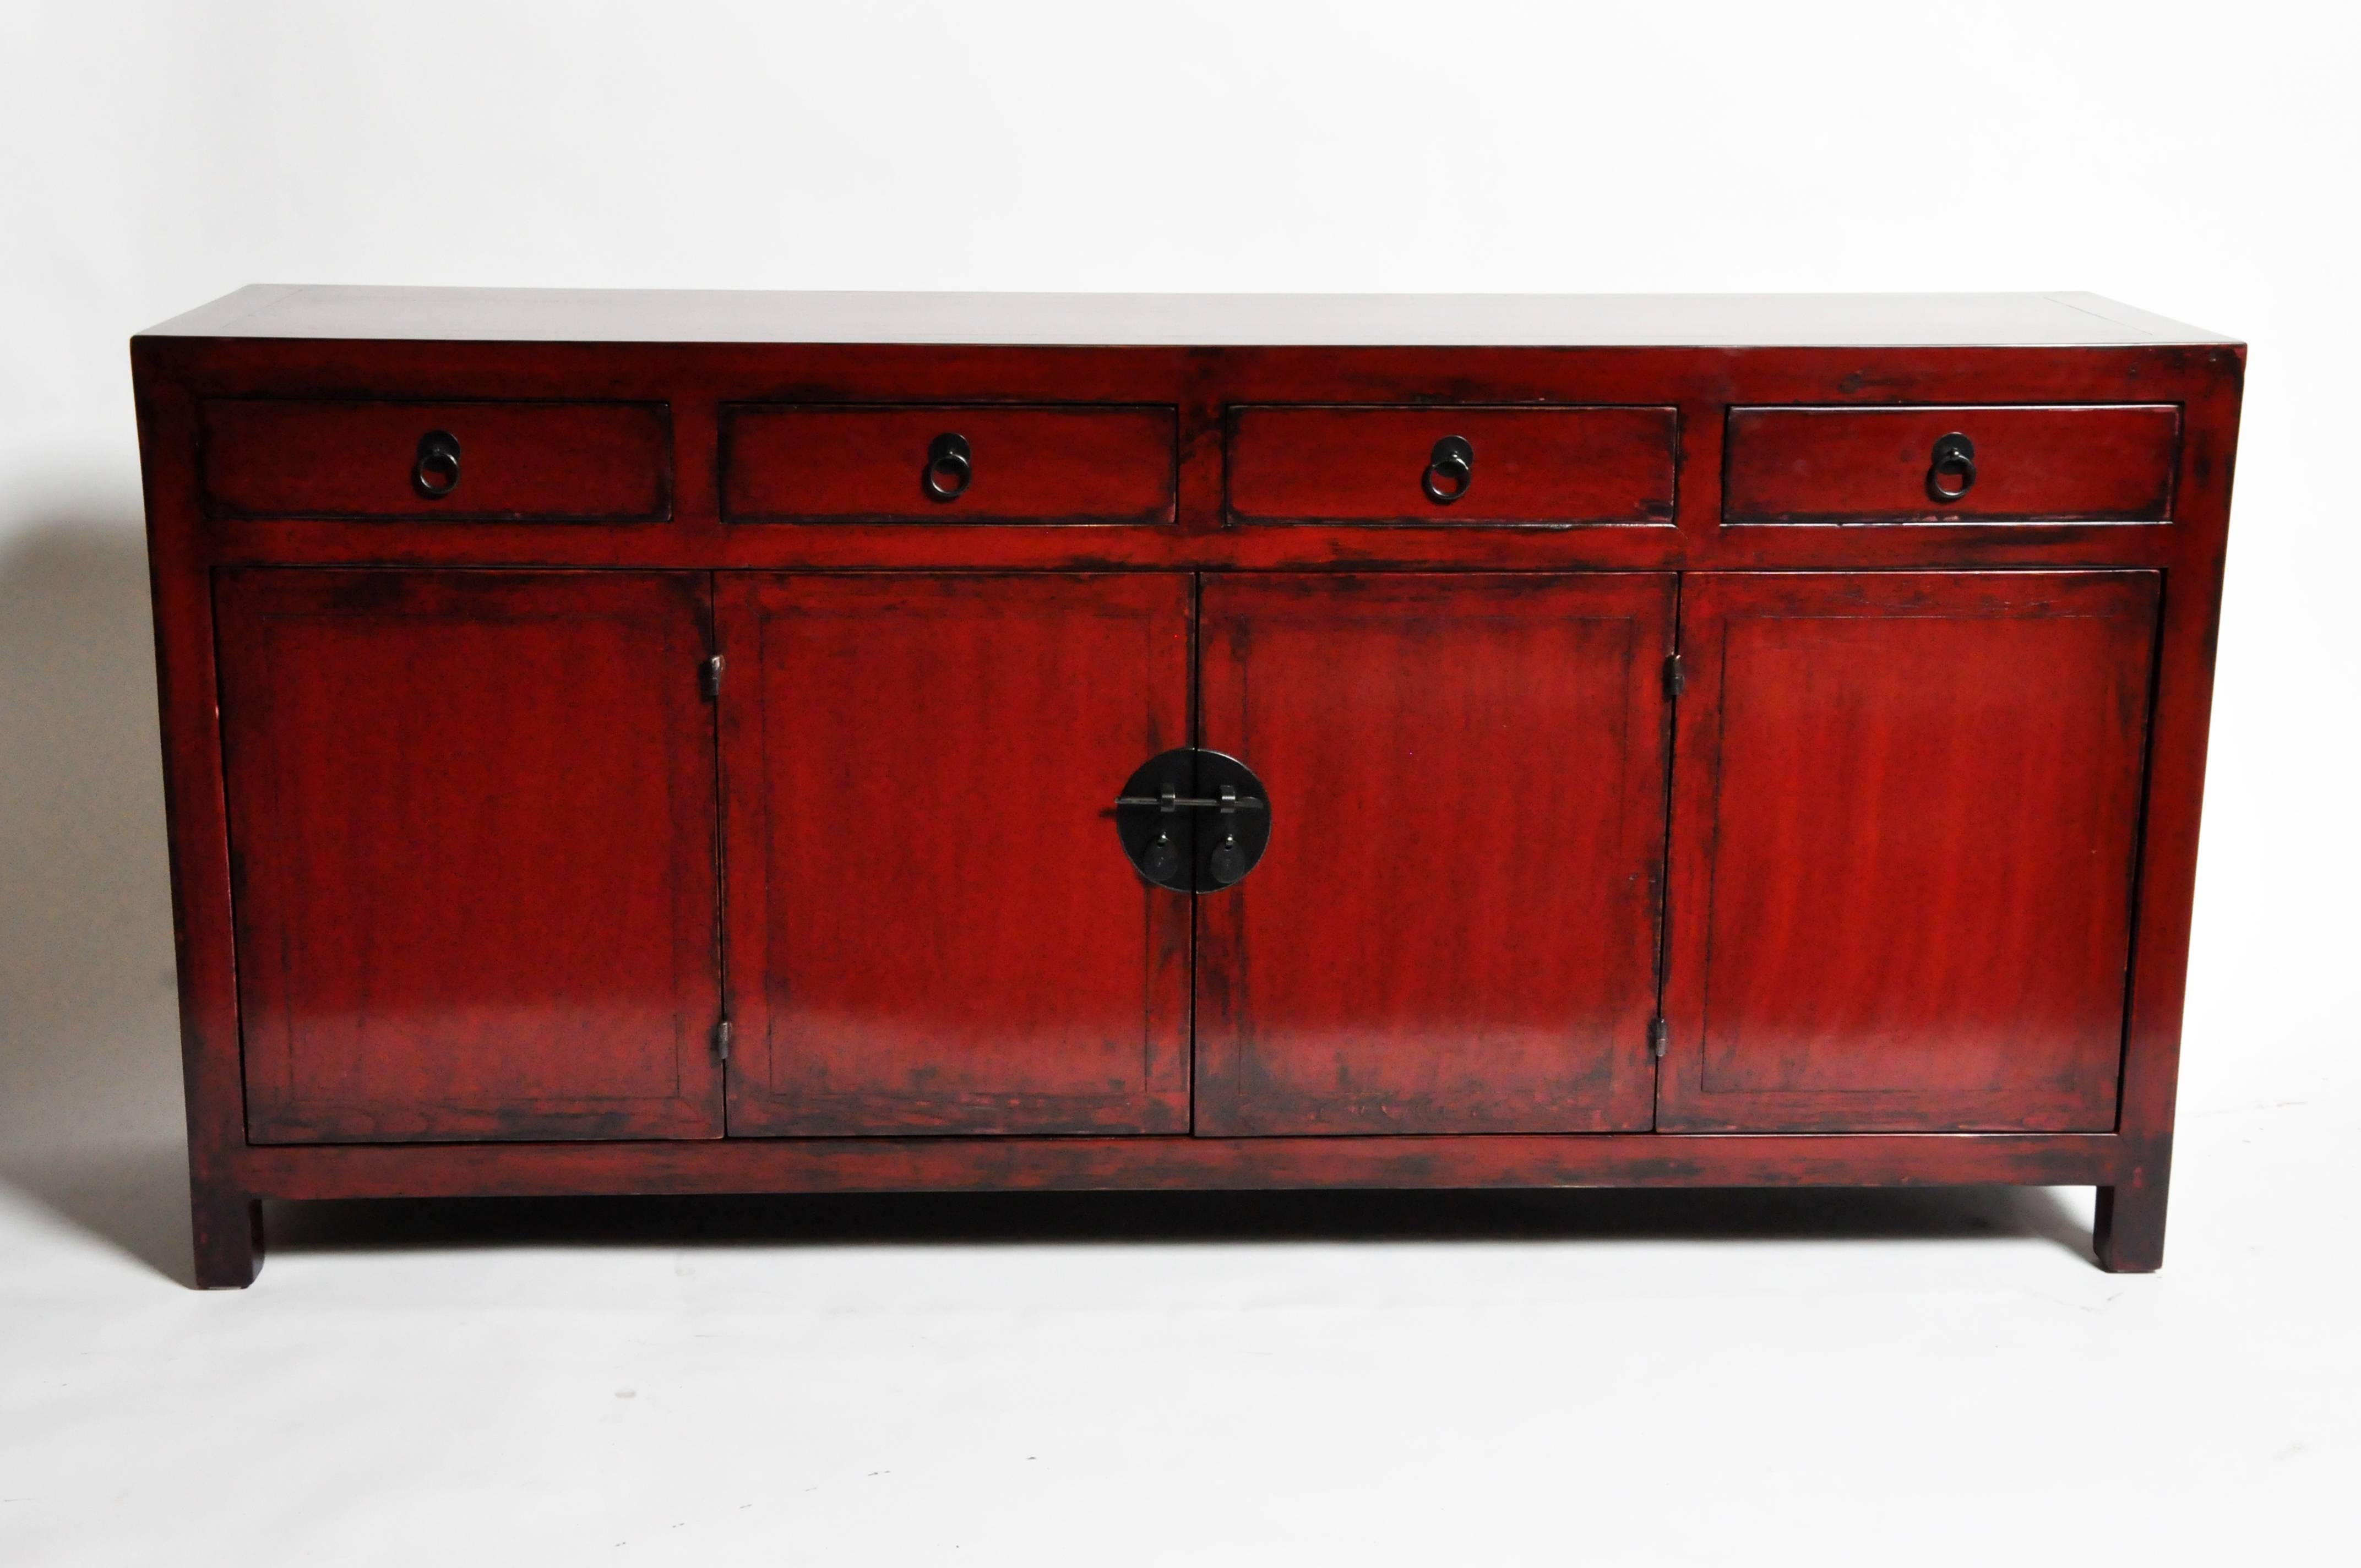 Contemporary Red Lacquered Chinese Sideboard with Four Drawers and Bi-Folding Doors